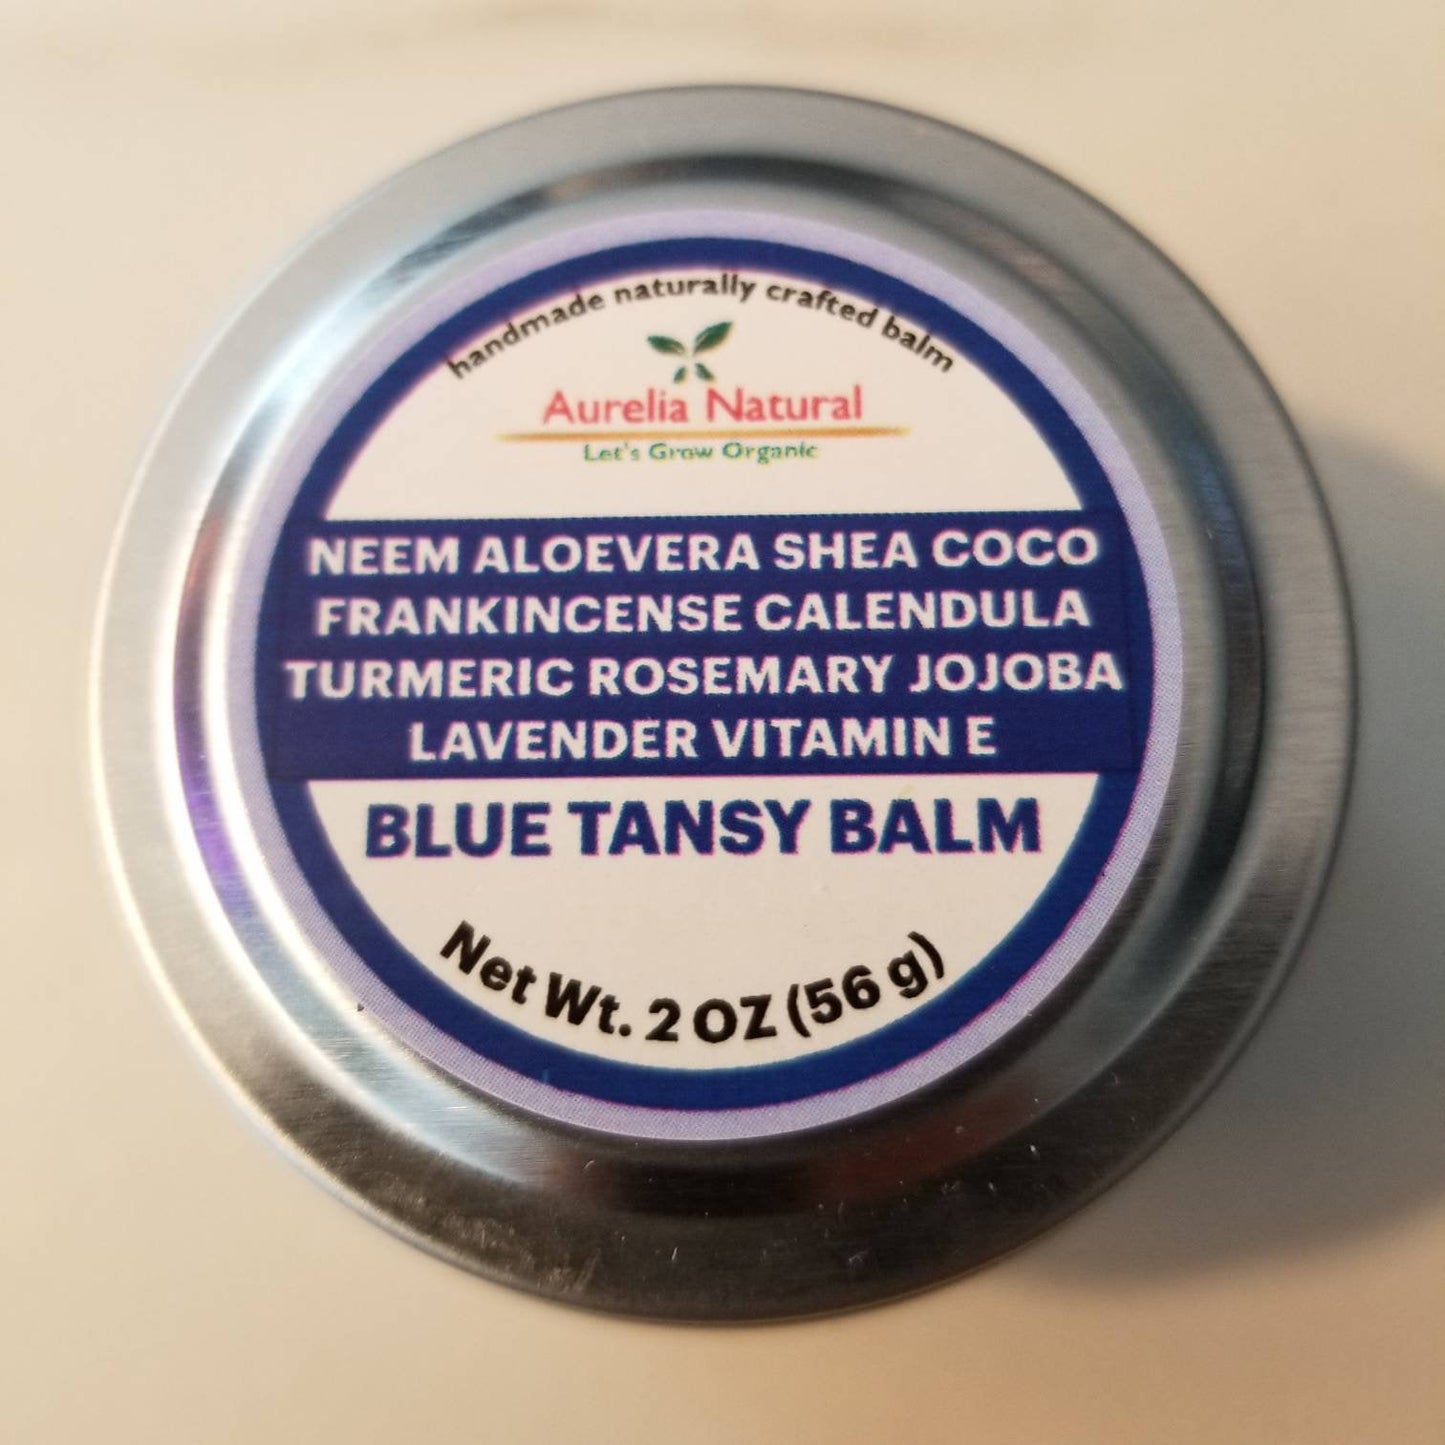 Luxurious Blue Tansy Manuka Honey Face Balm Soothe Cool Irritated Skin High quality Handcrafted